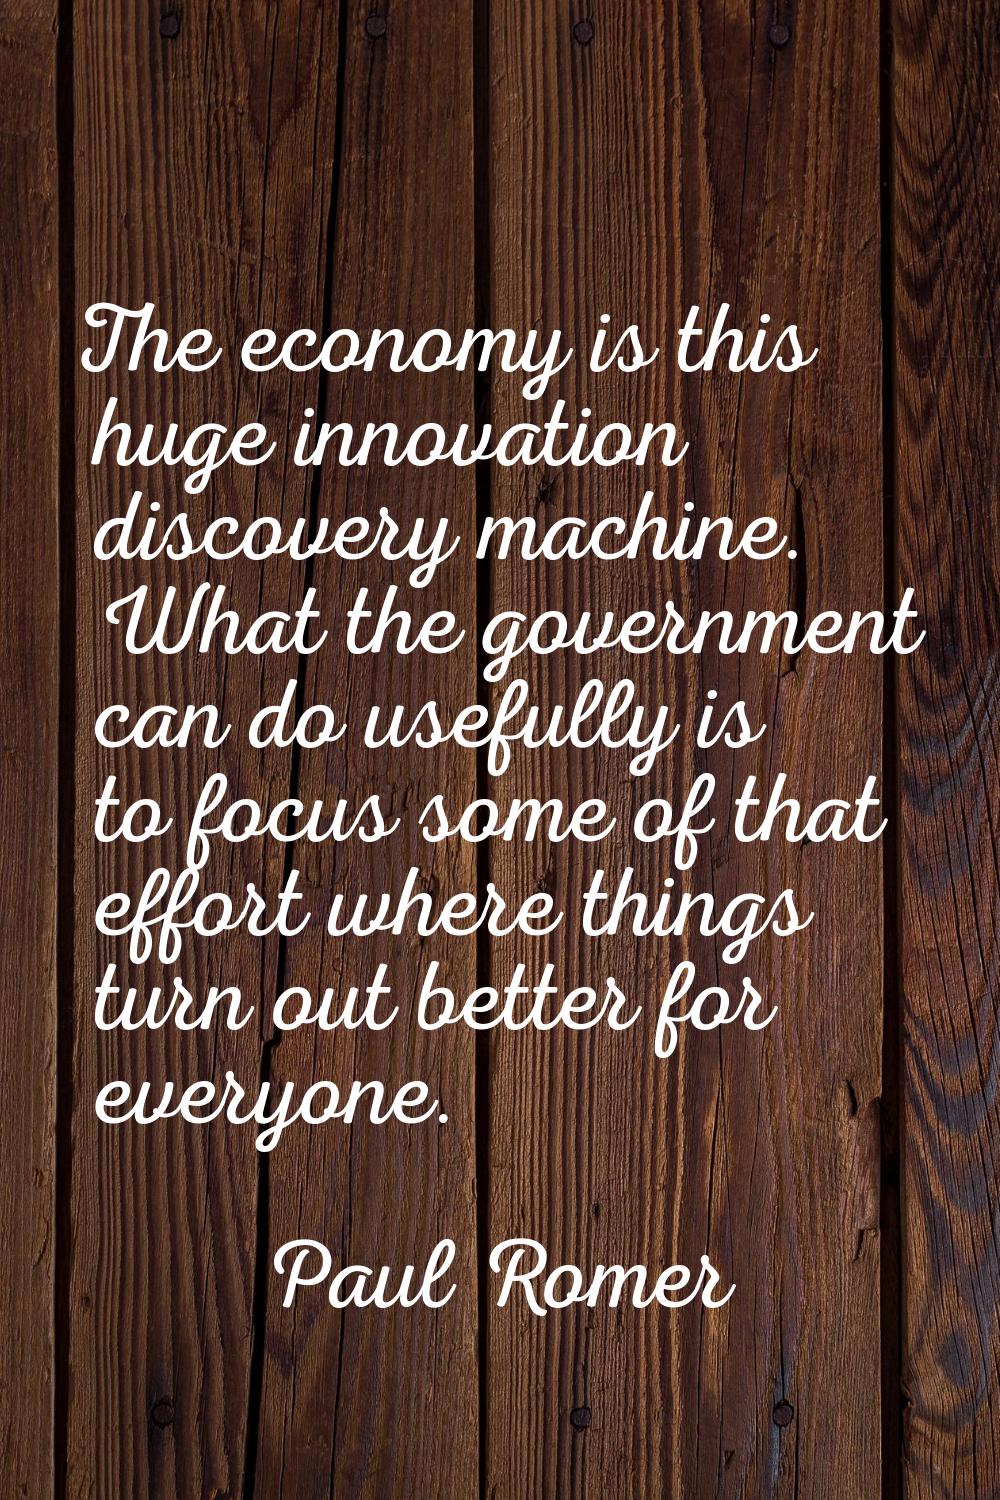 The economy is this huge innovation discovery machine. What the government can do usefully is to fo